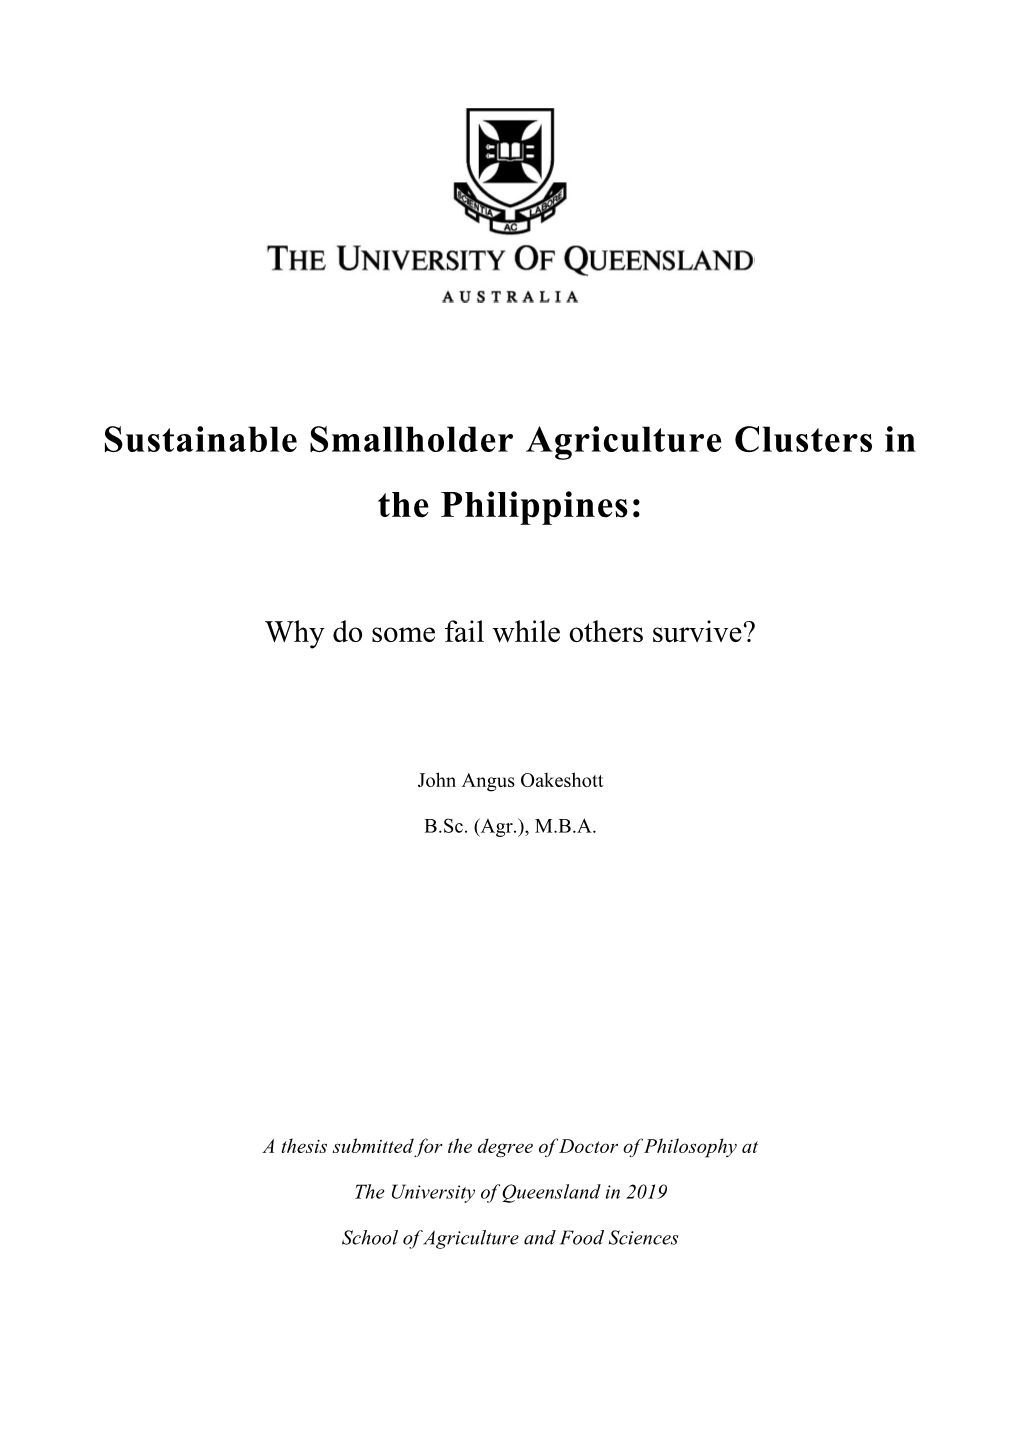 Sustainable Smallholder Agriculture Clusters in the Philippines